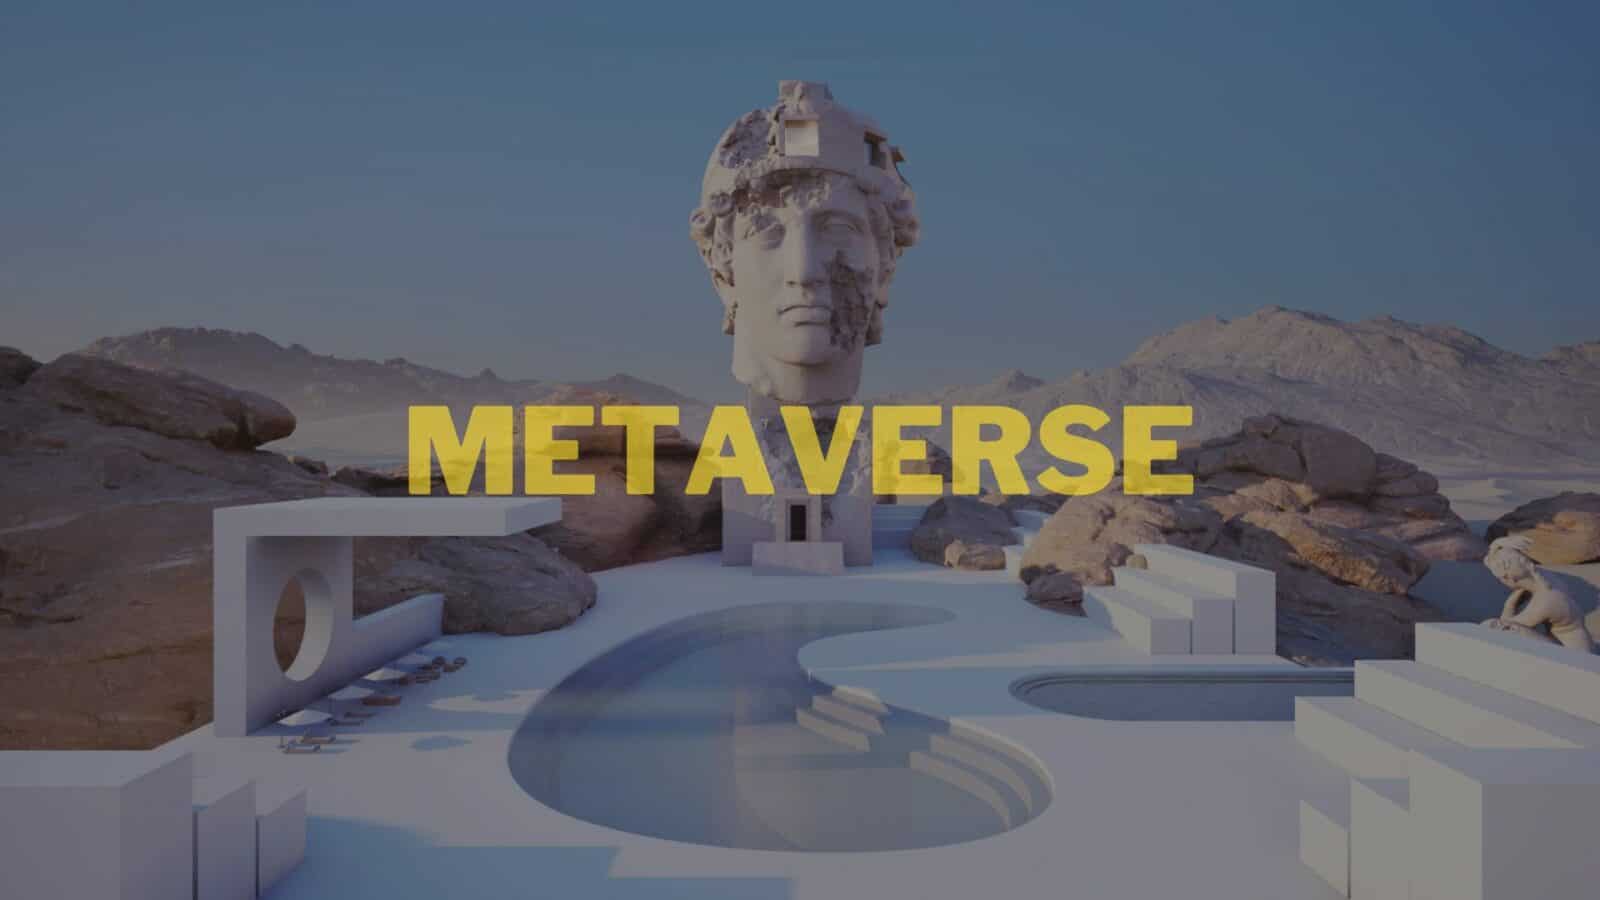 How Will the Metaverse Transform Our Experiences as a Society?